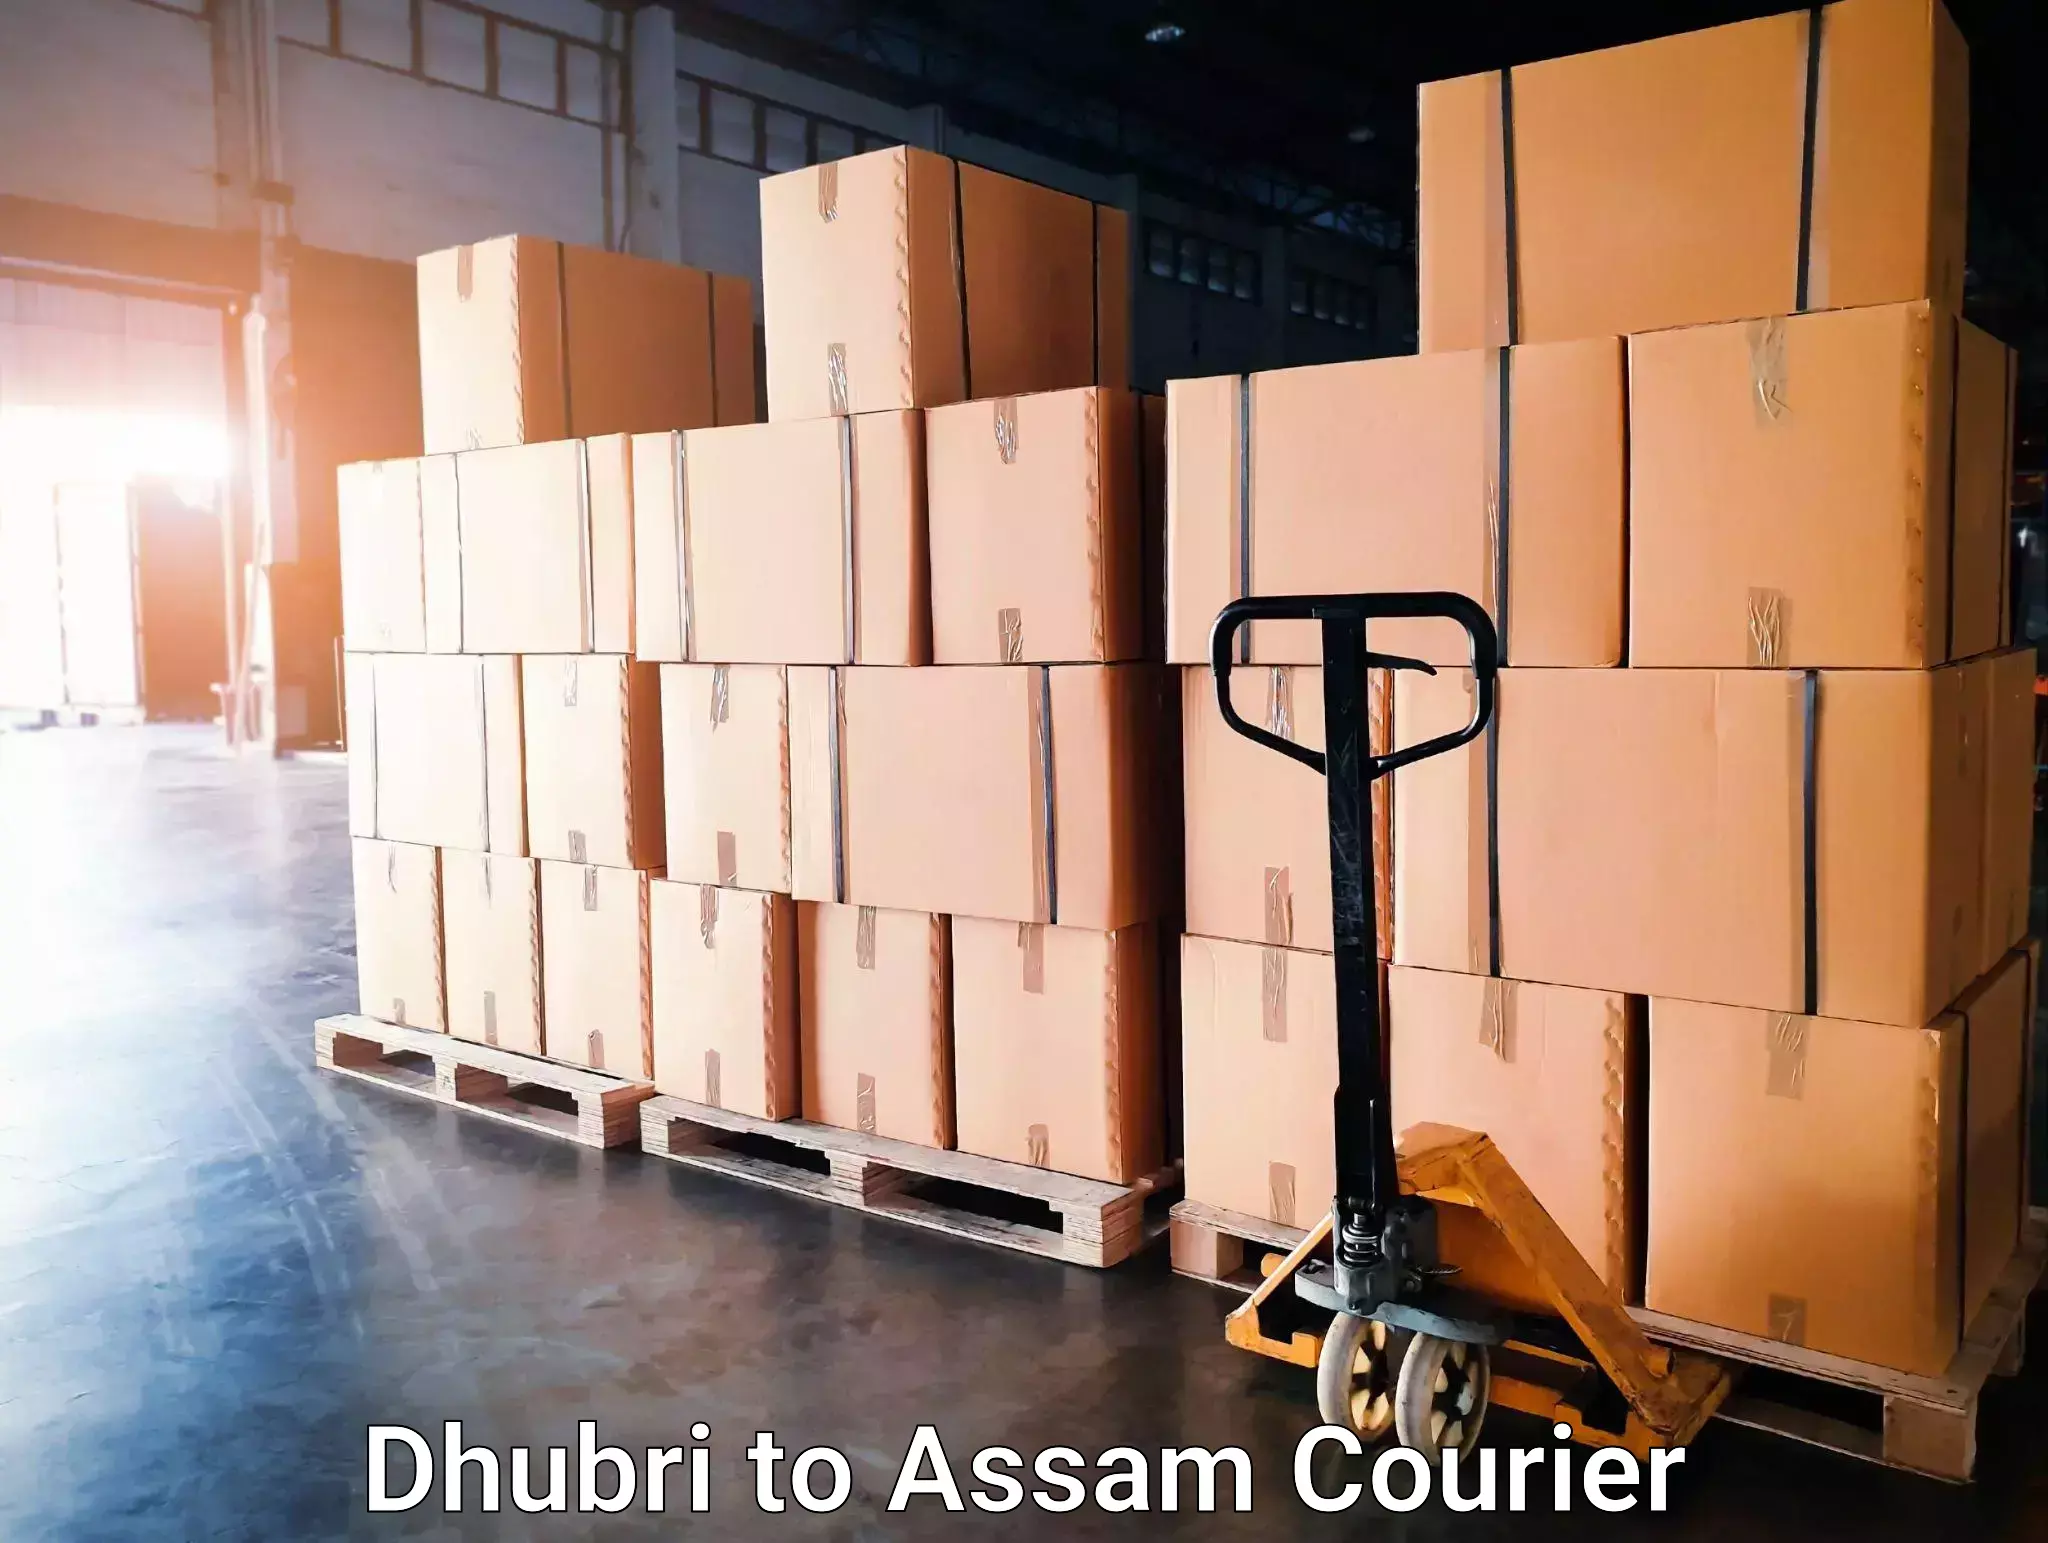 Next-day delivery options in Dhubri to Dhubri